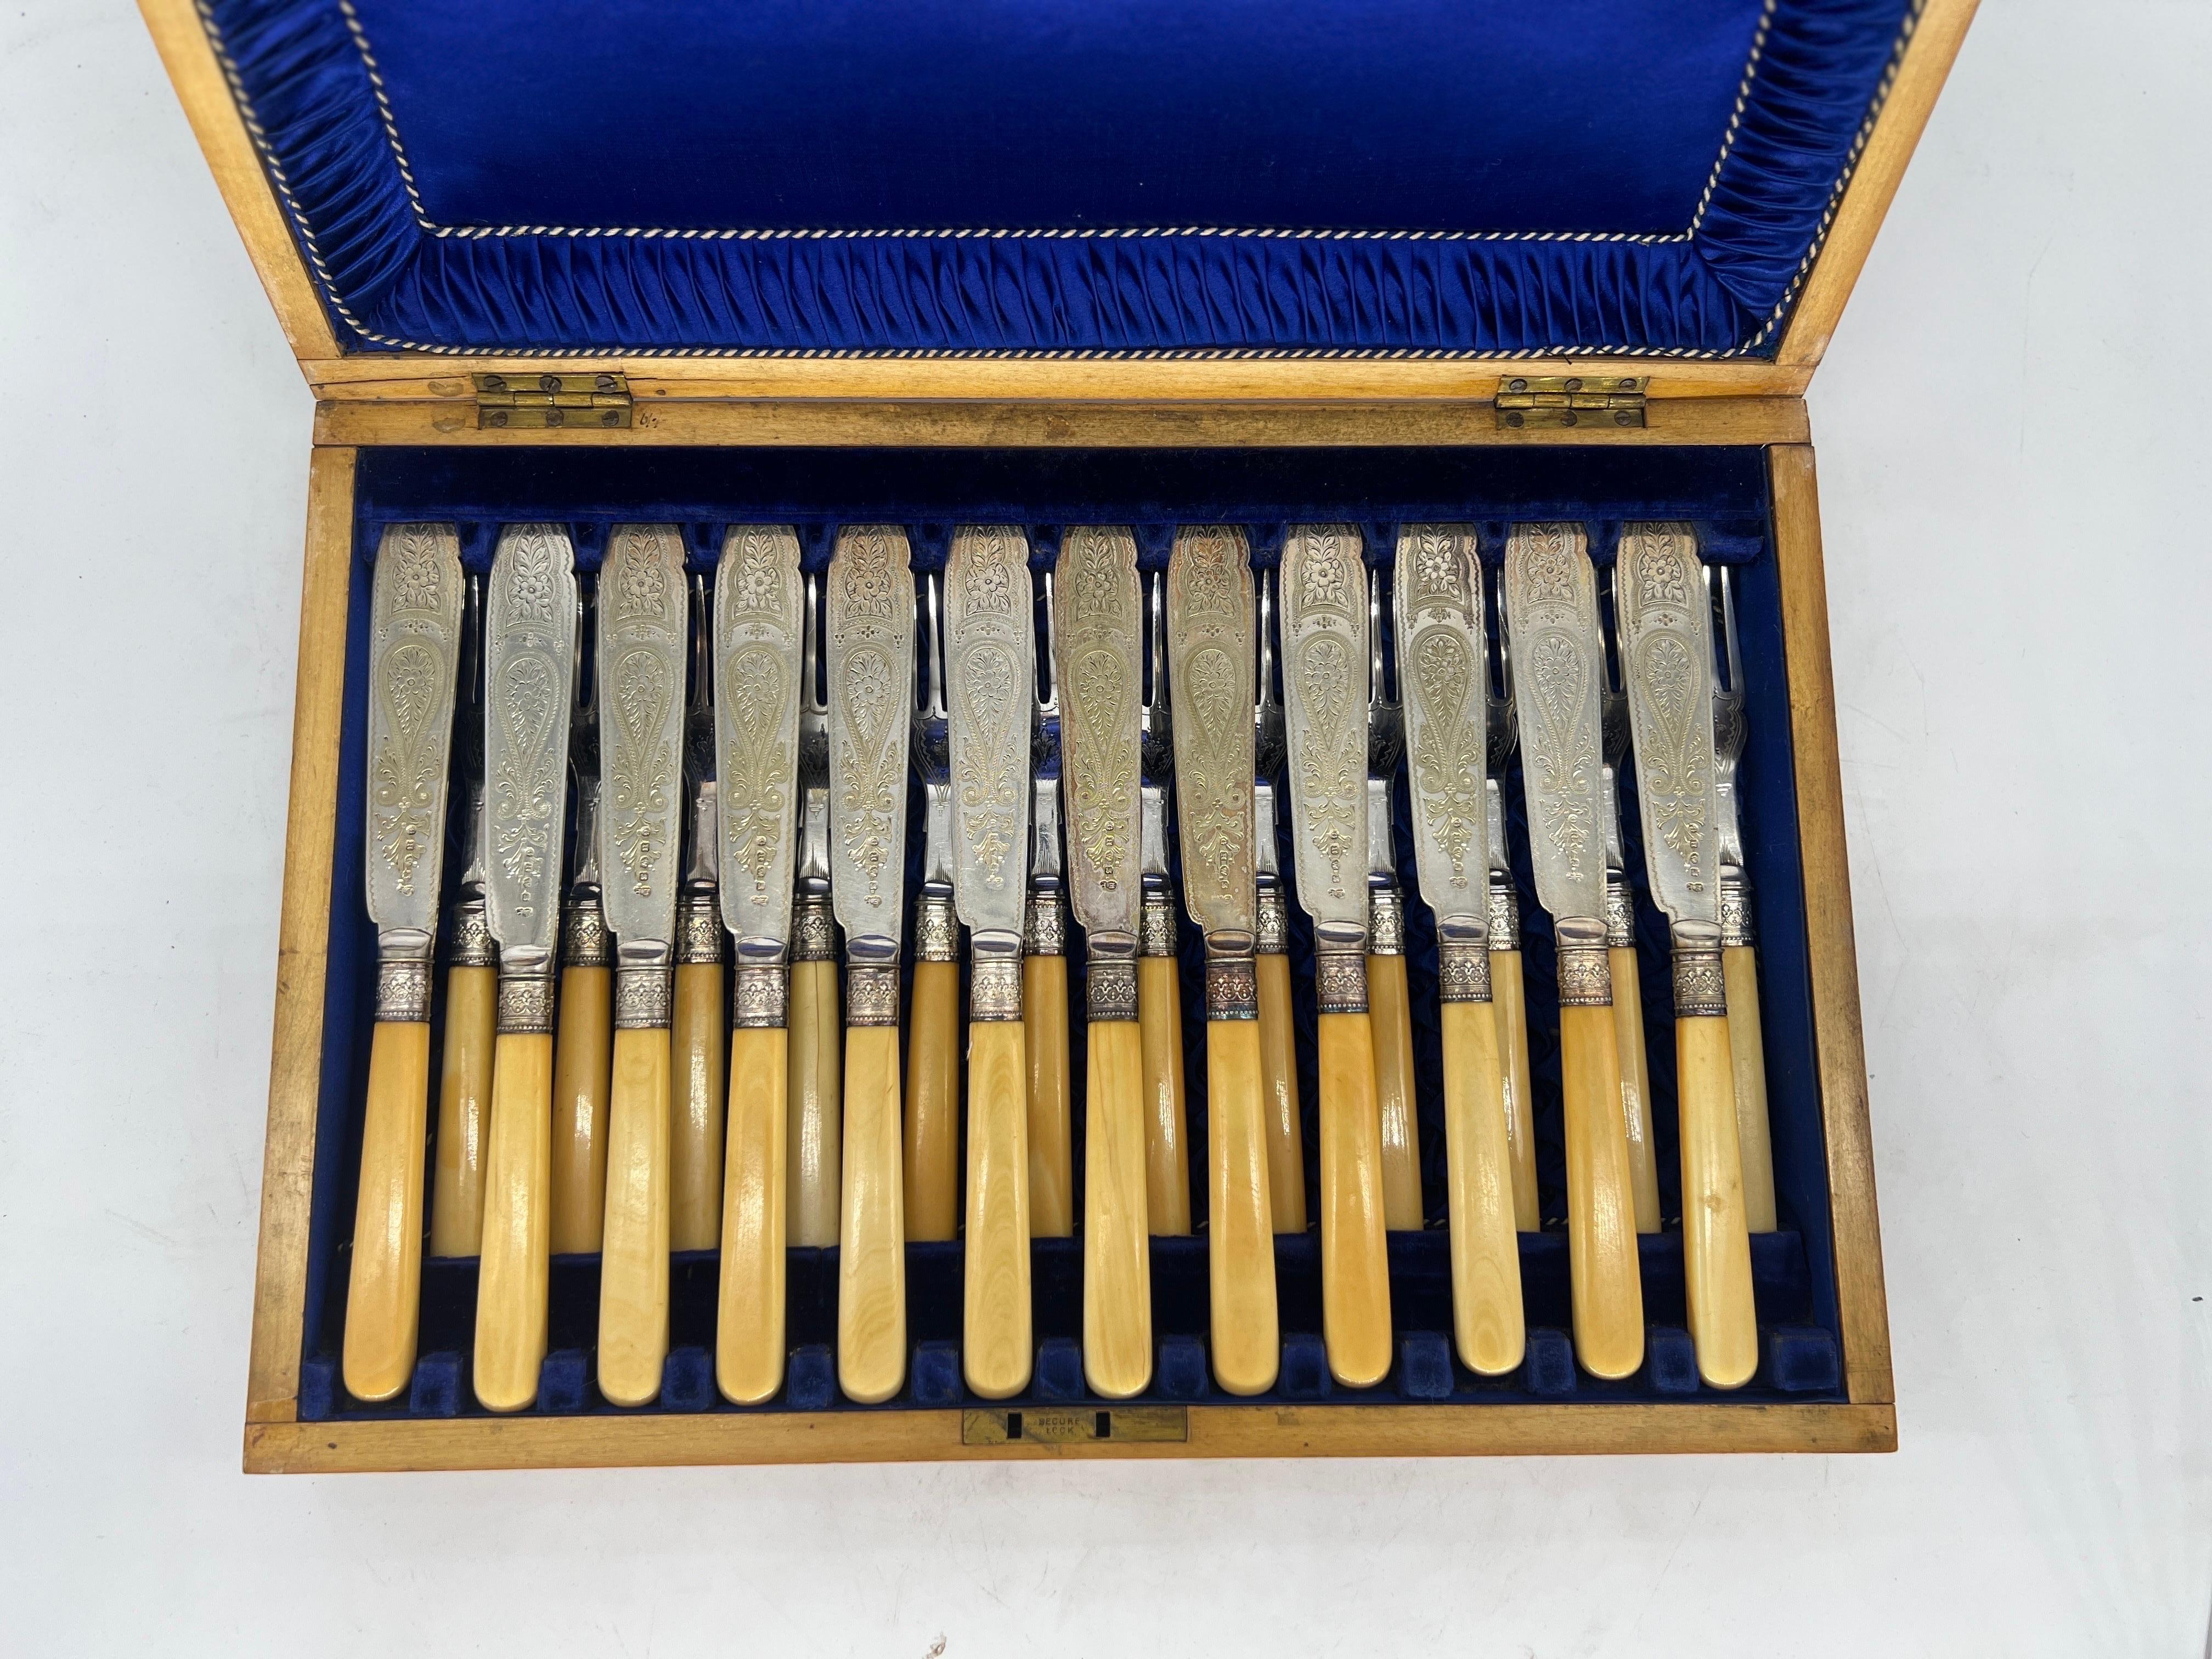 English, early 20th century.

A fine cased fish or dessert set comprising of 12 forks and 12 knives. Each with beautifully hand engraved silver plated surfaces, sterling silver collar and a bone handle. All housed inside a velvet lined case made for